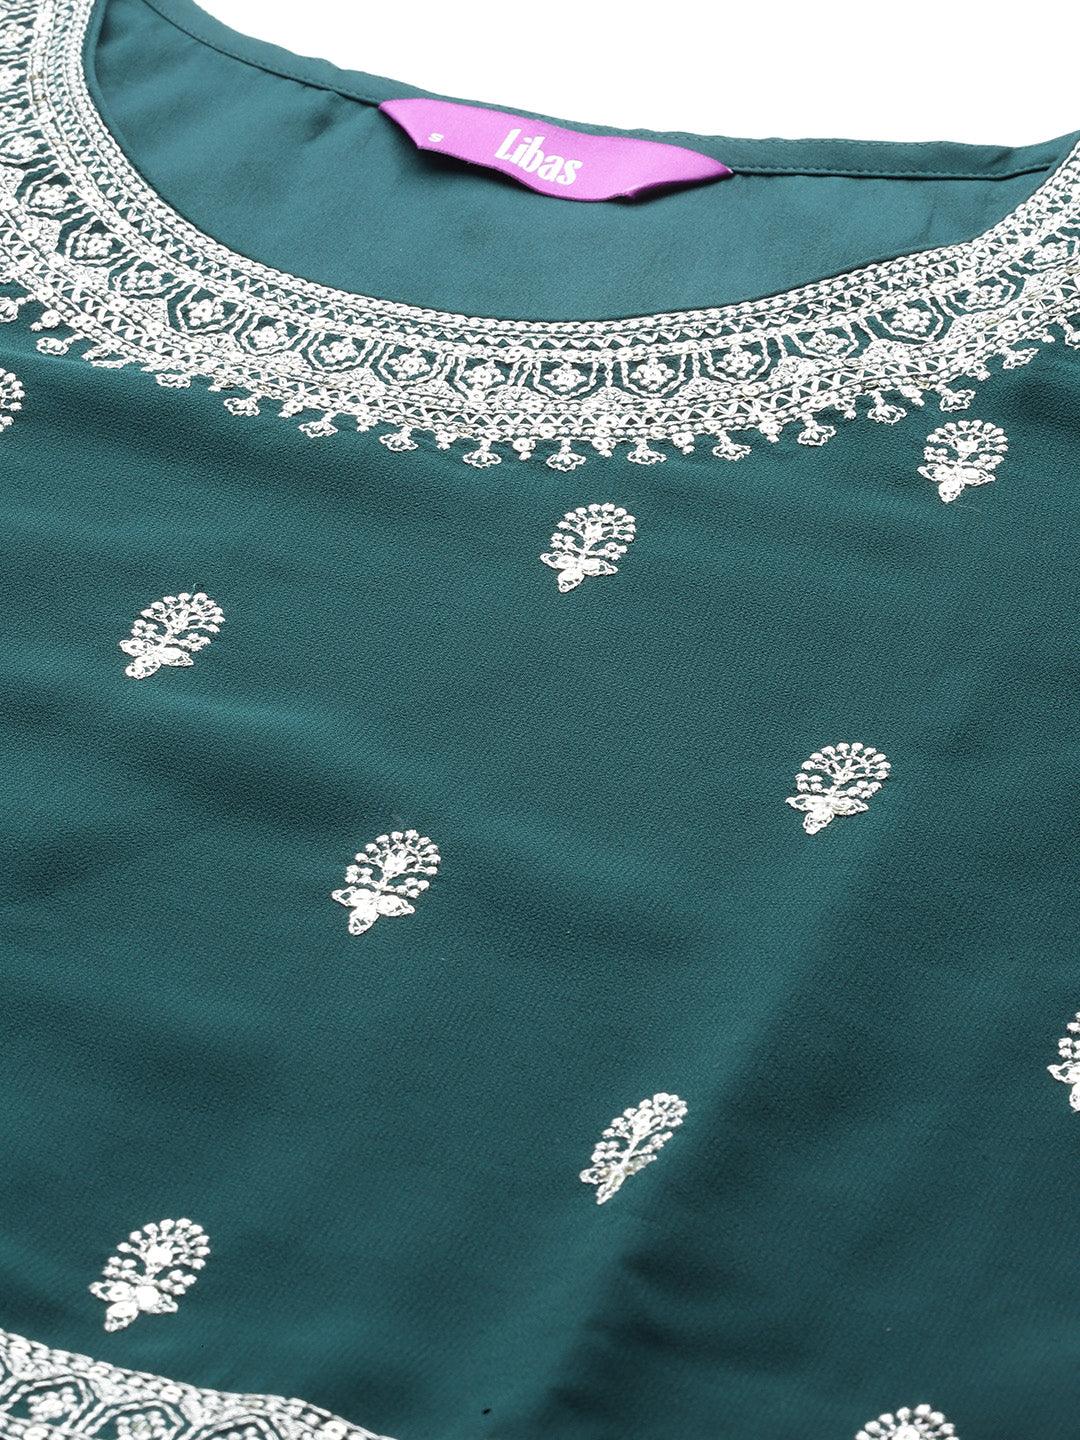 Bottle Green Embroidered Georgette A-Line Kurta With Palazzos & Dupatta - Libas